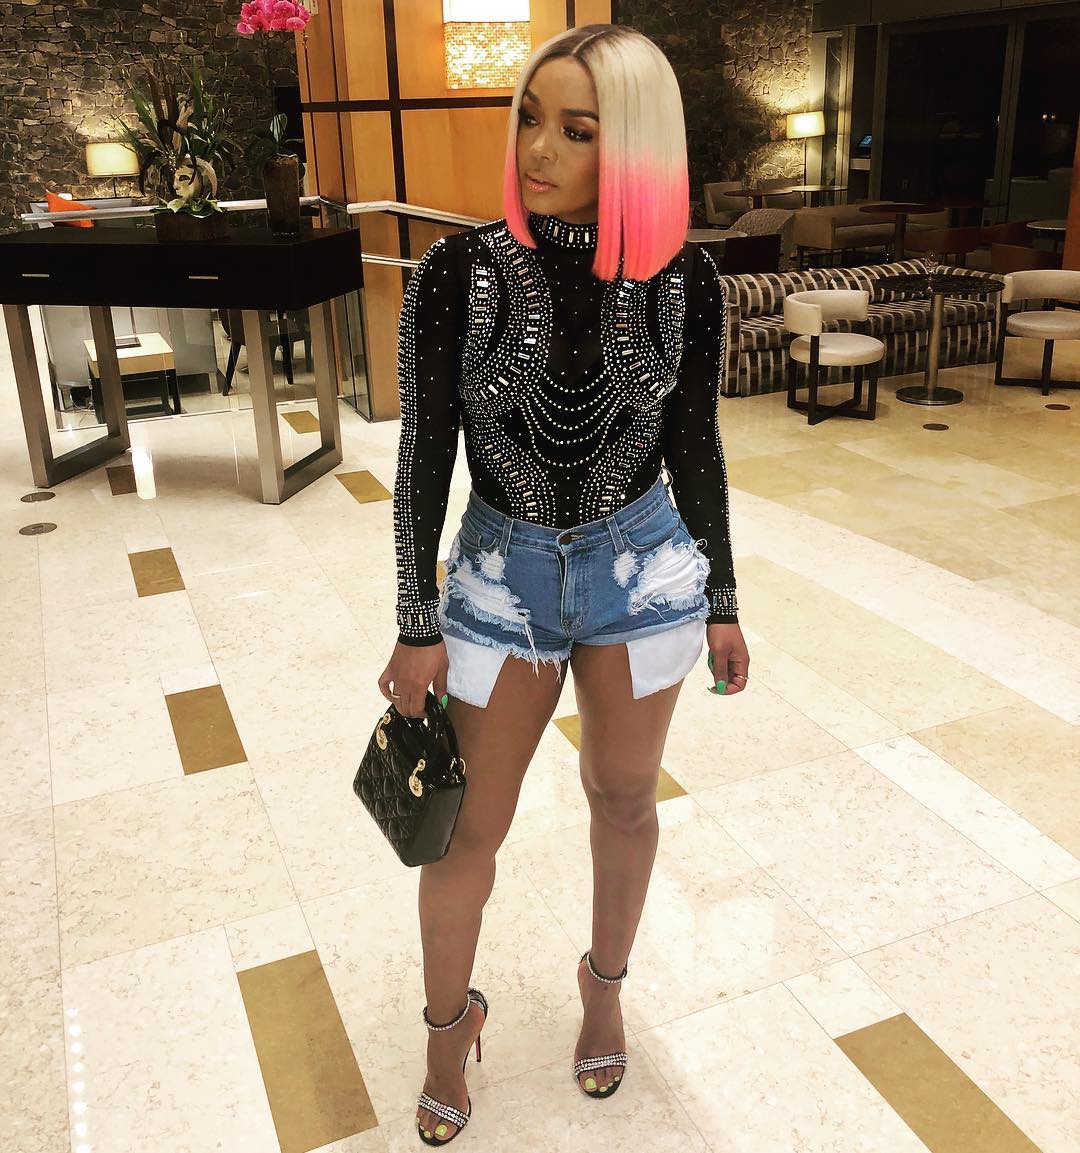 rasheeda-frost-has-an-important-message-about-credit-check-out-her-video